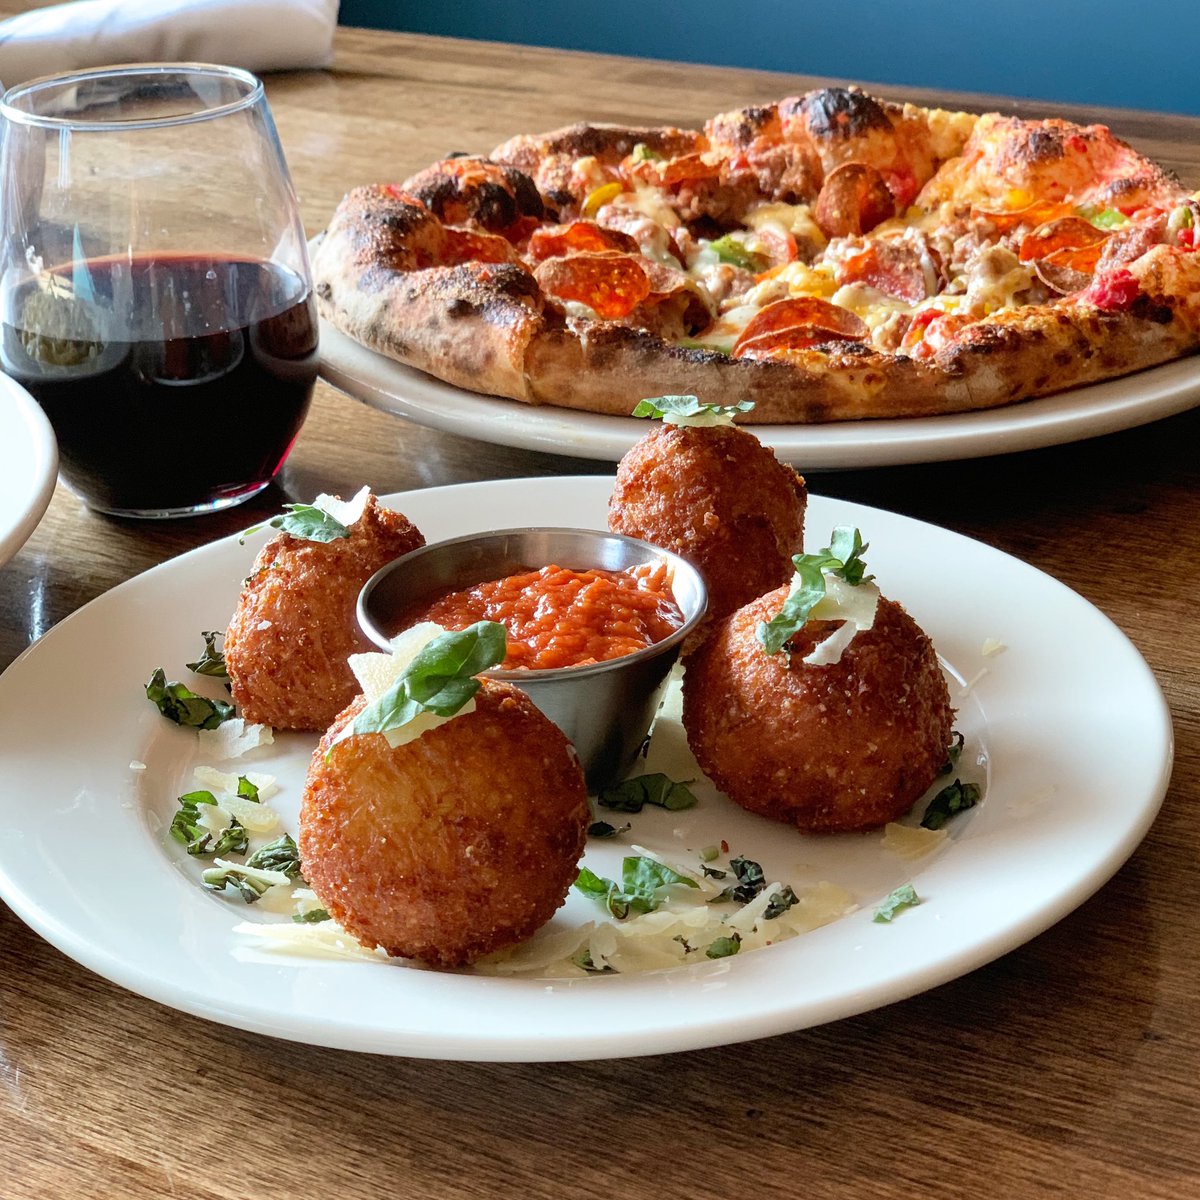 Start your meal with our Stuffed Arancini 🟠-fillings change daily
•
•
•
#arancini #risottoballs #apizzalyfe #pizza #instafood #italianfood #foodstagram #chicagolandeats  #infatuationchi #thrillist #chicagofoodauthority #yelpchicagoburbs #checkpleasepics #eater_chicago